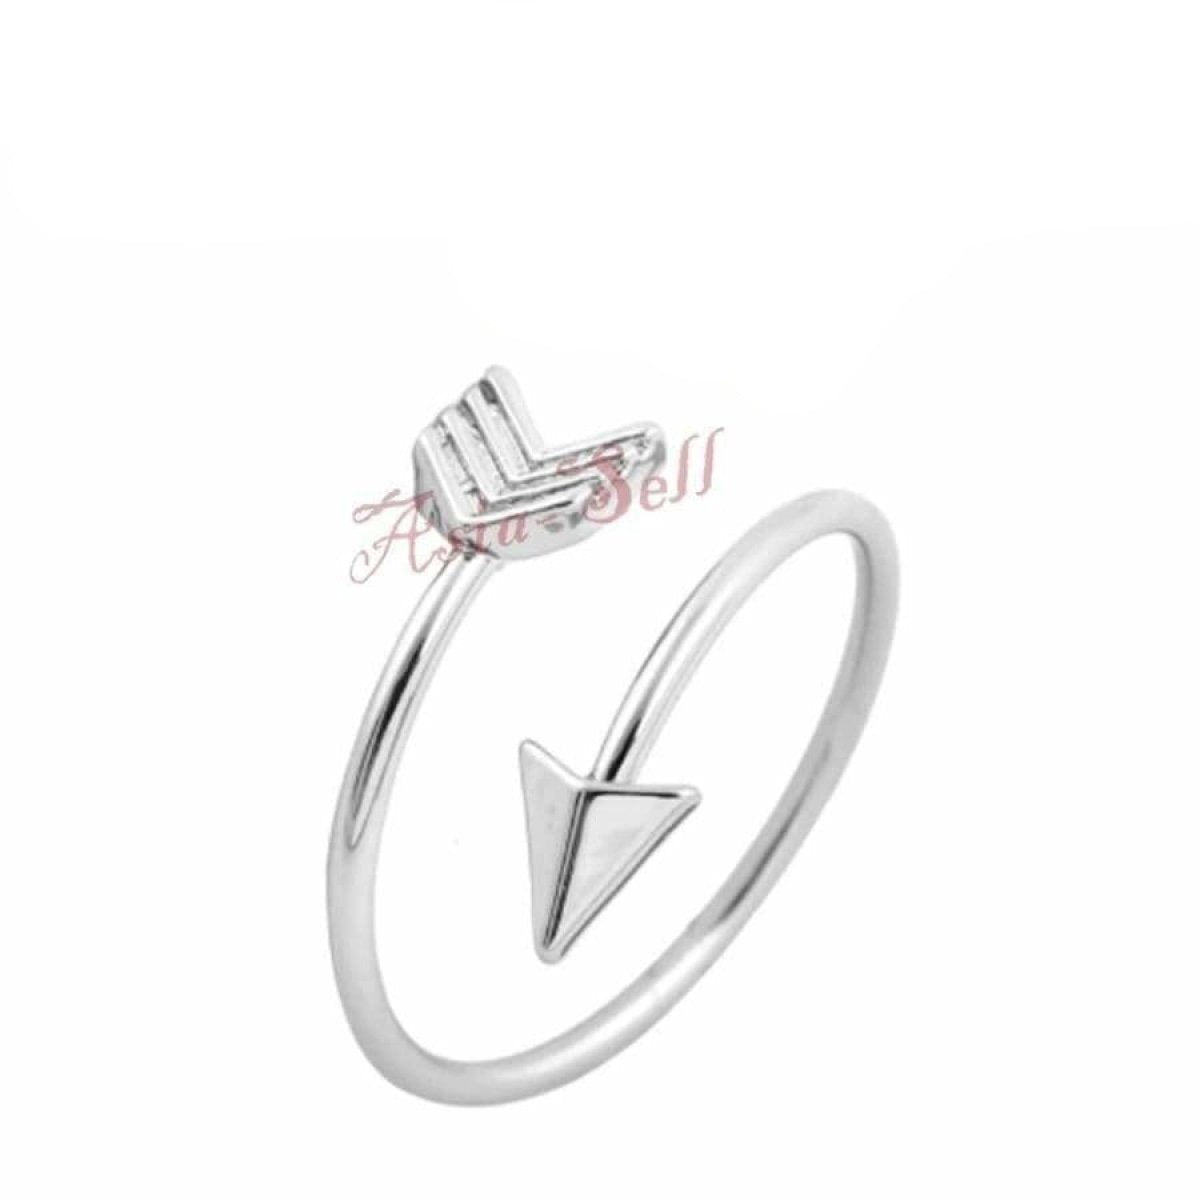 Size 6.5 Silver Colour Arrow Womens Ring Fashion Adjustable Wedding Gift Jewelry Rings